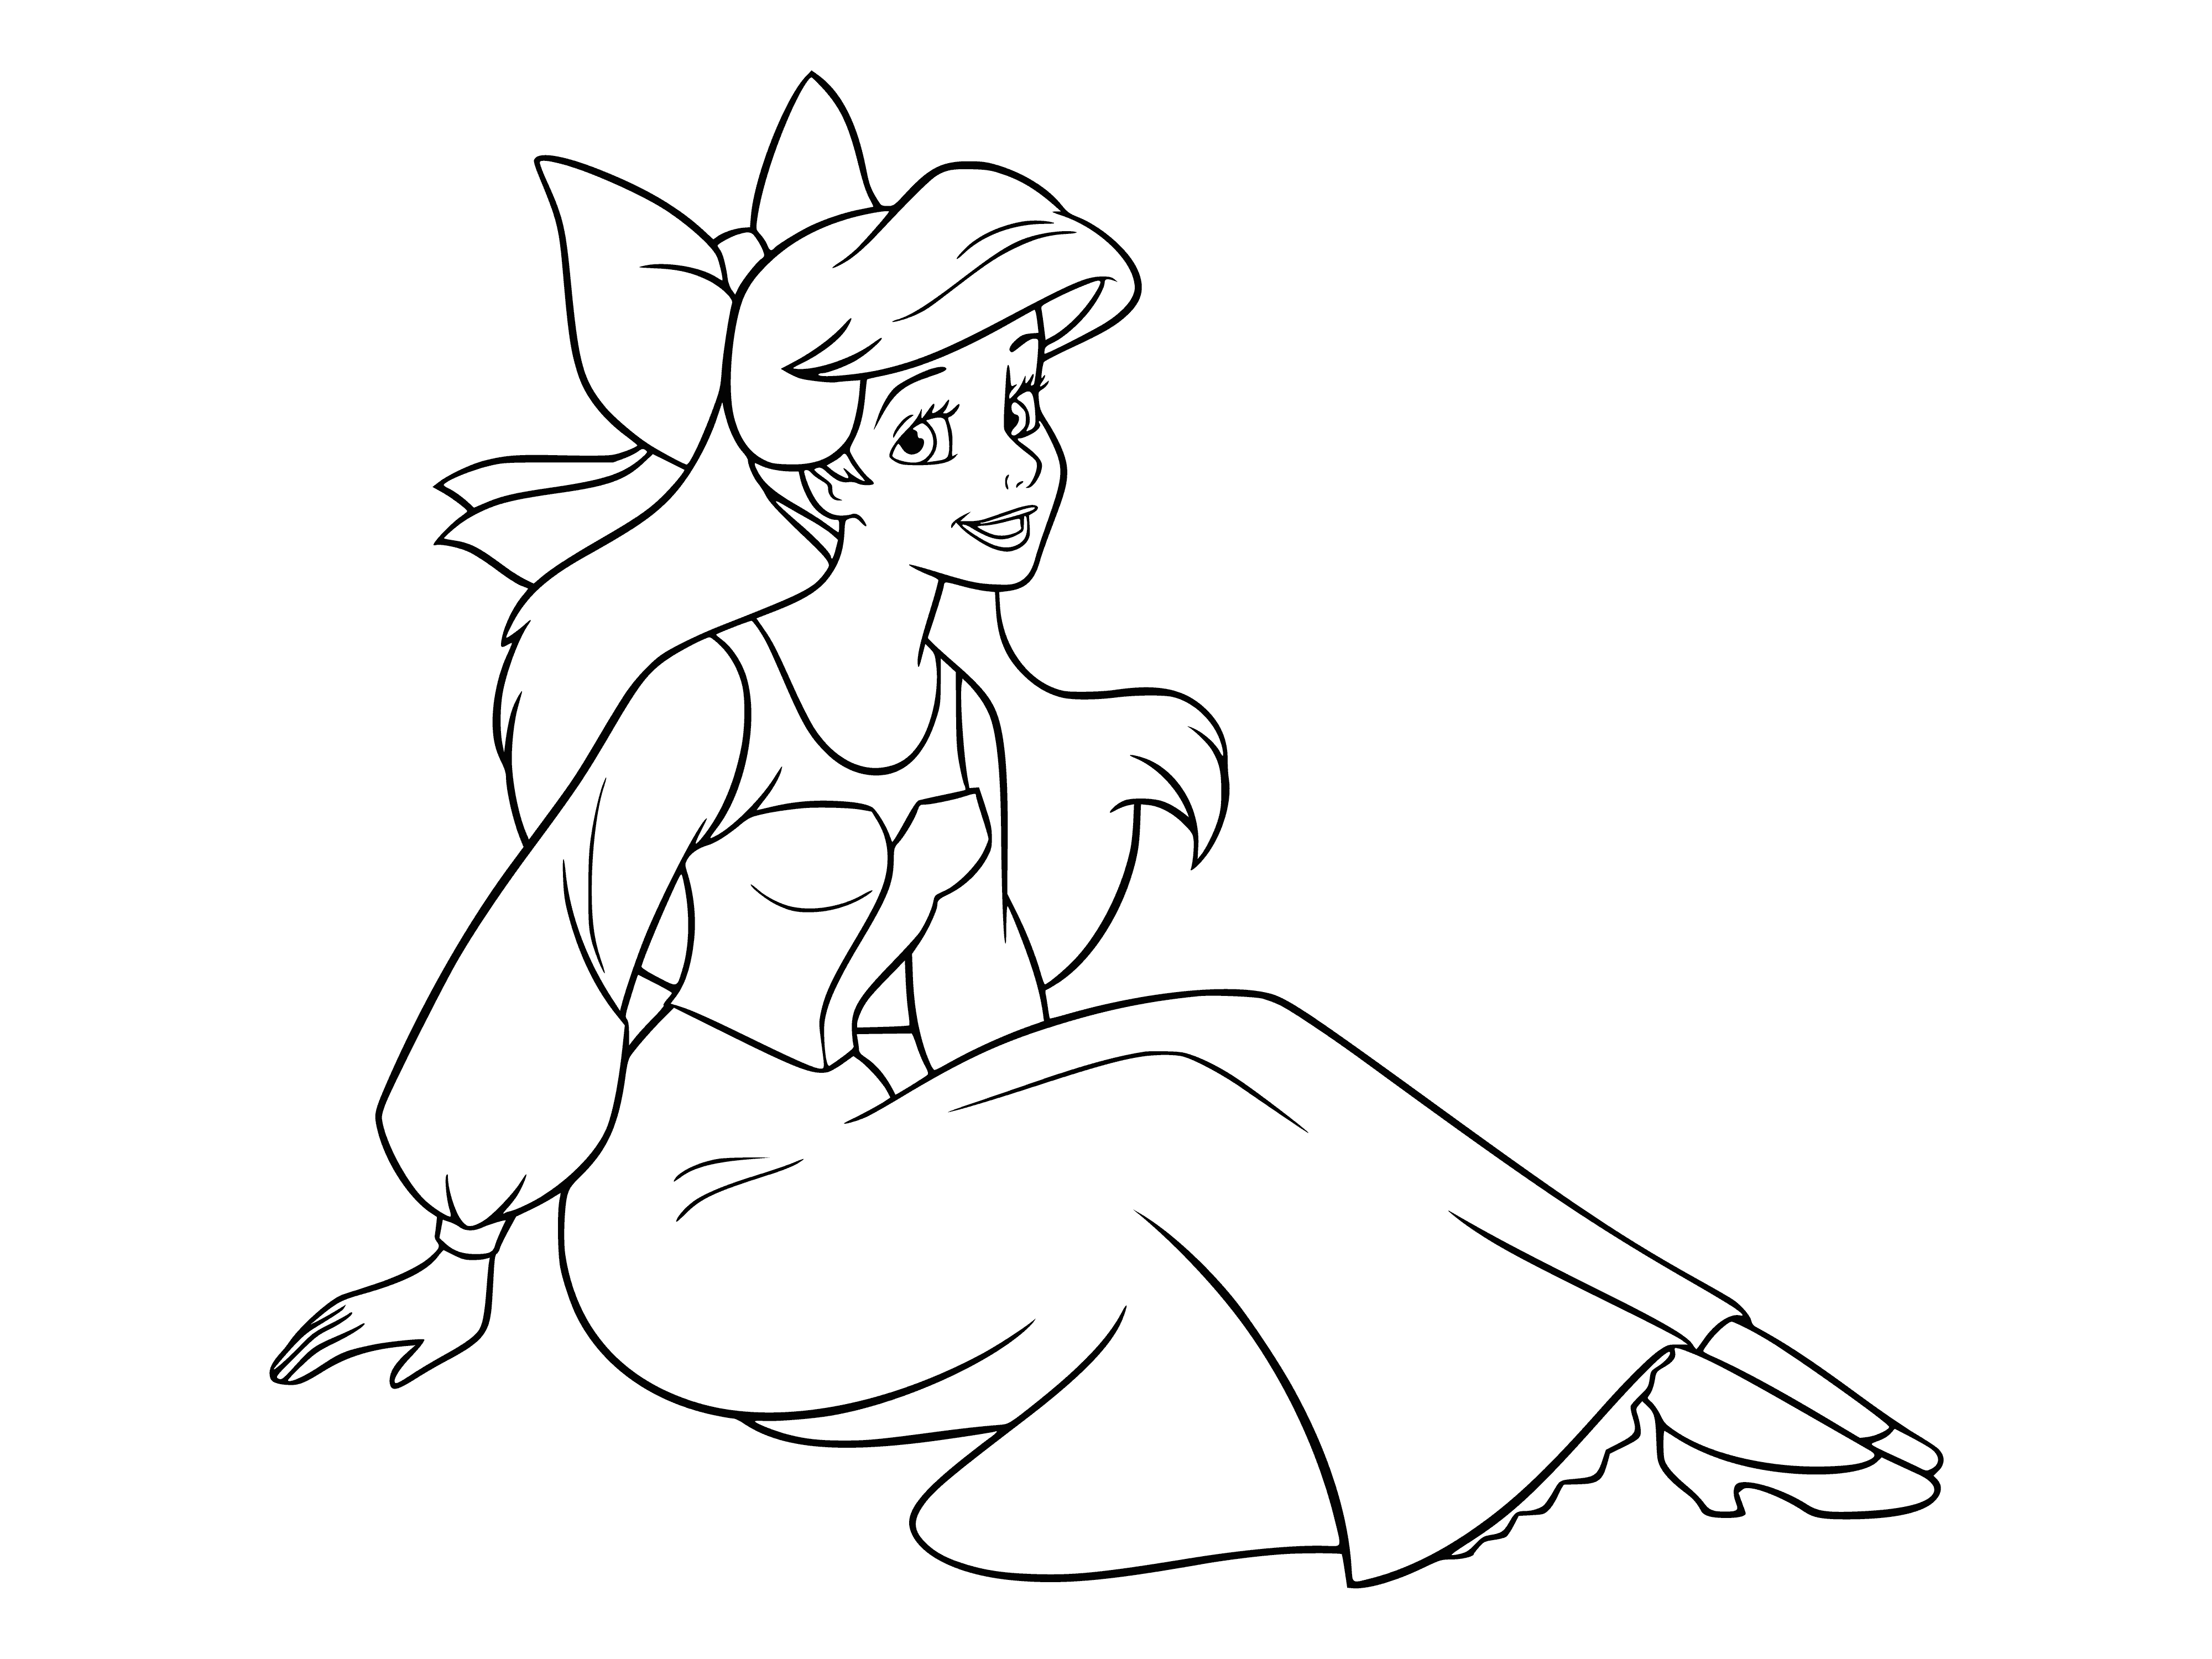 The little mermaid at the party coloring page